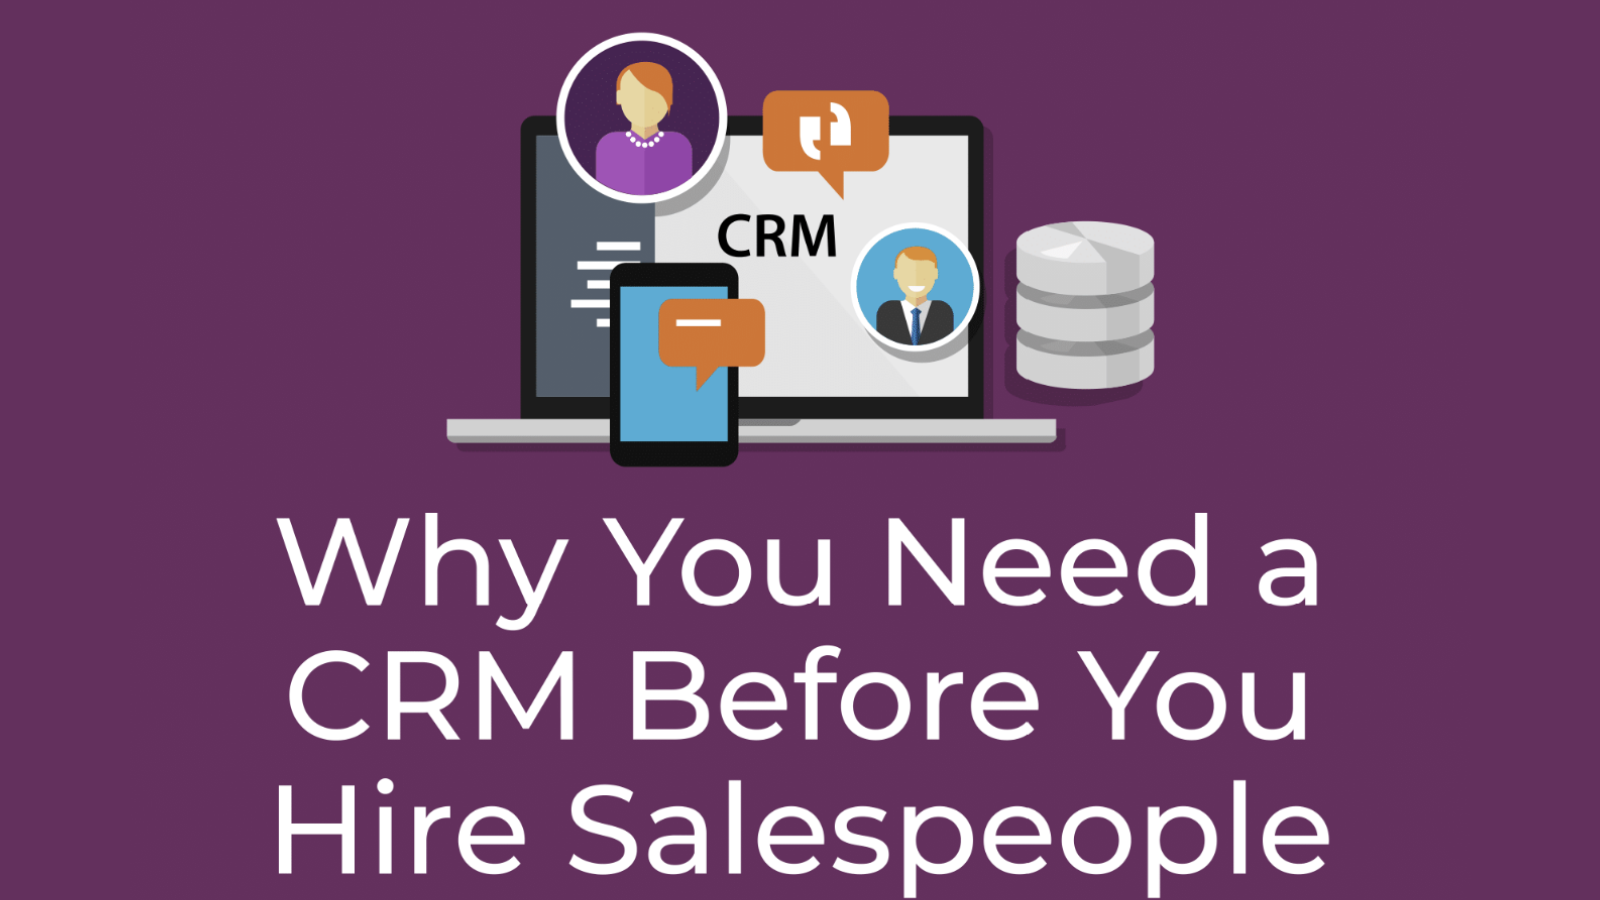 Why you need a CRM before hiring salespeople